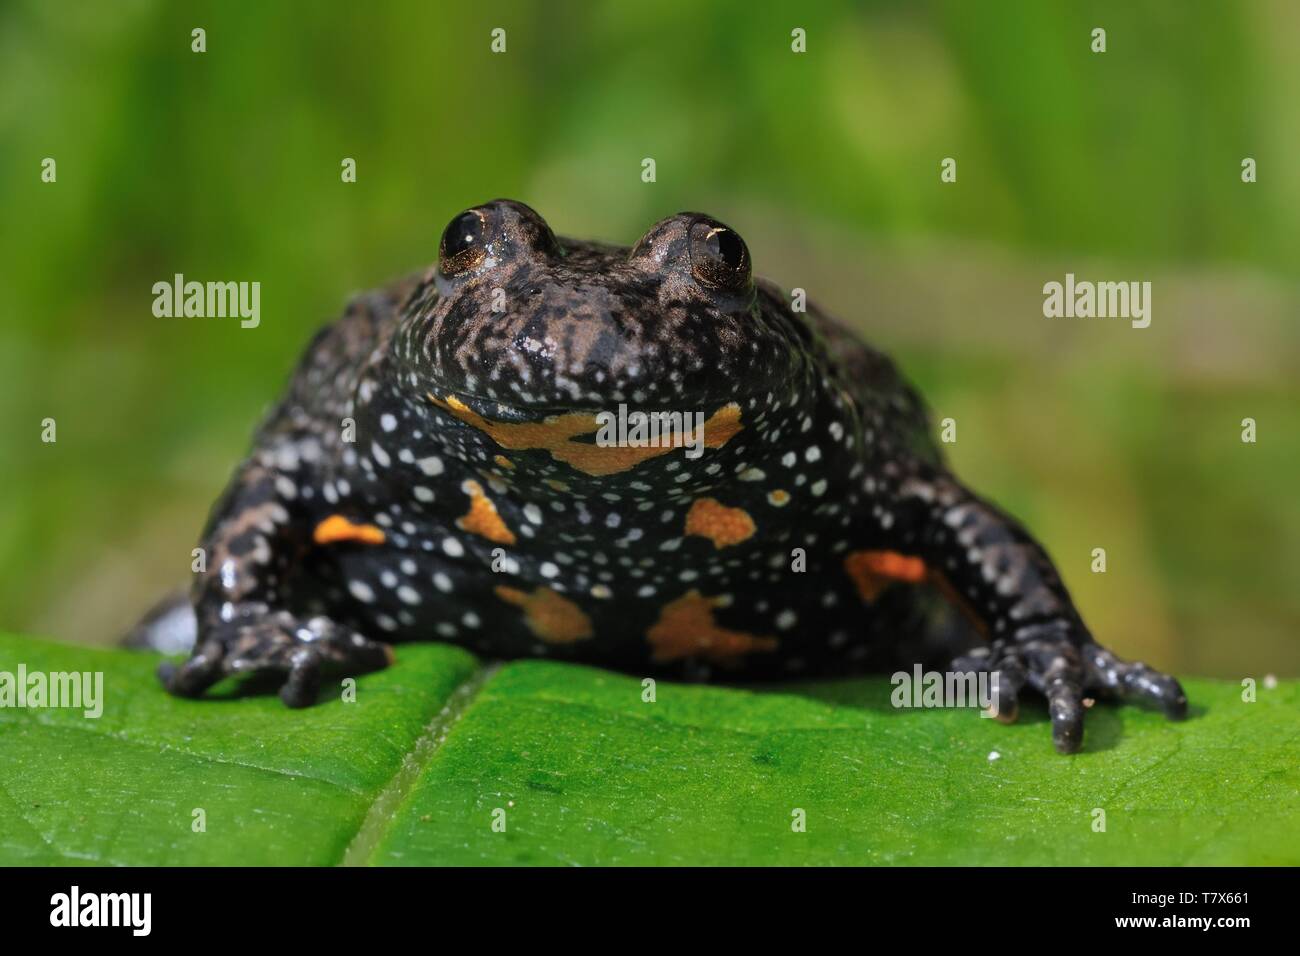 The European fire-bellied toad (Bombina bombina) captured close up on the leaf. Stock Photo